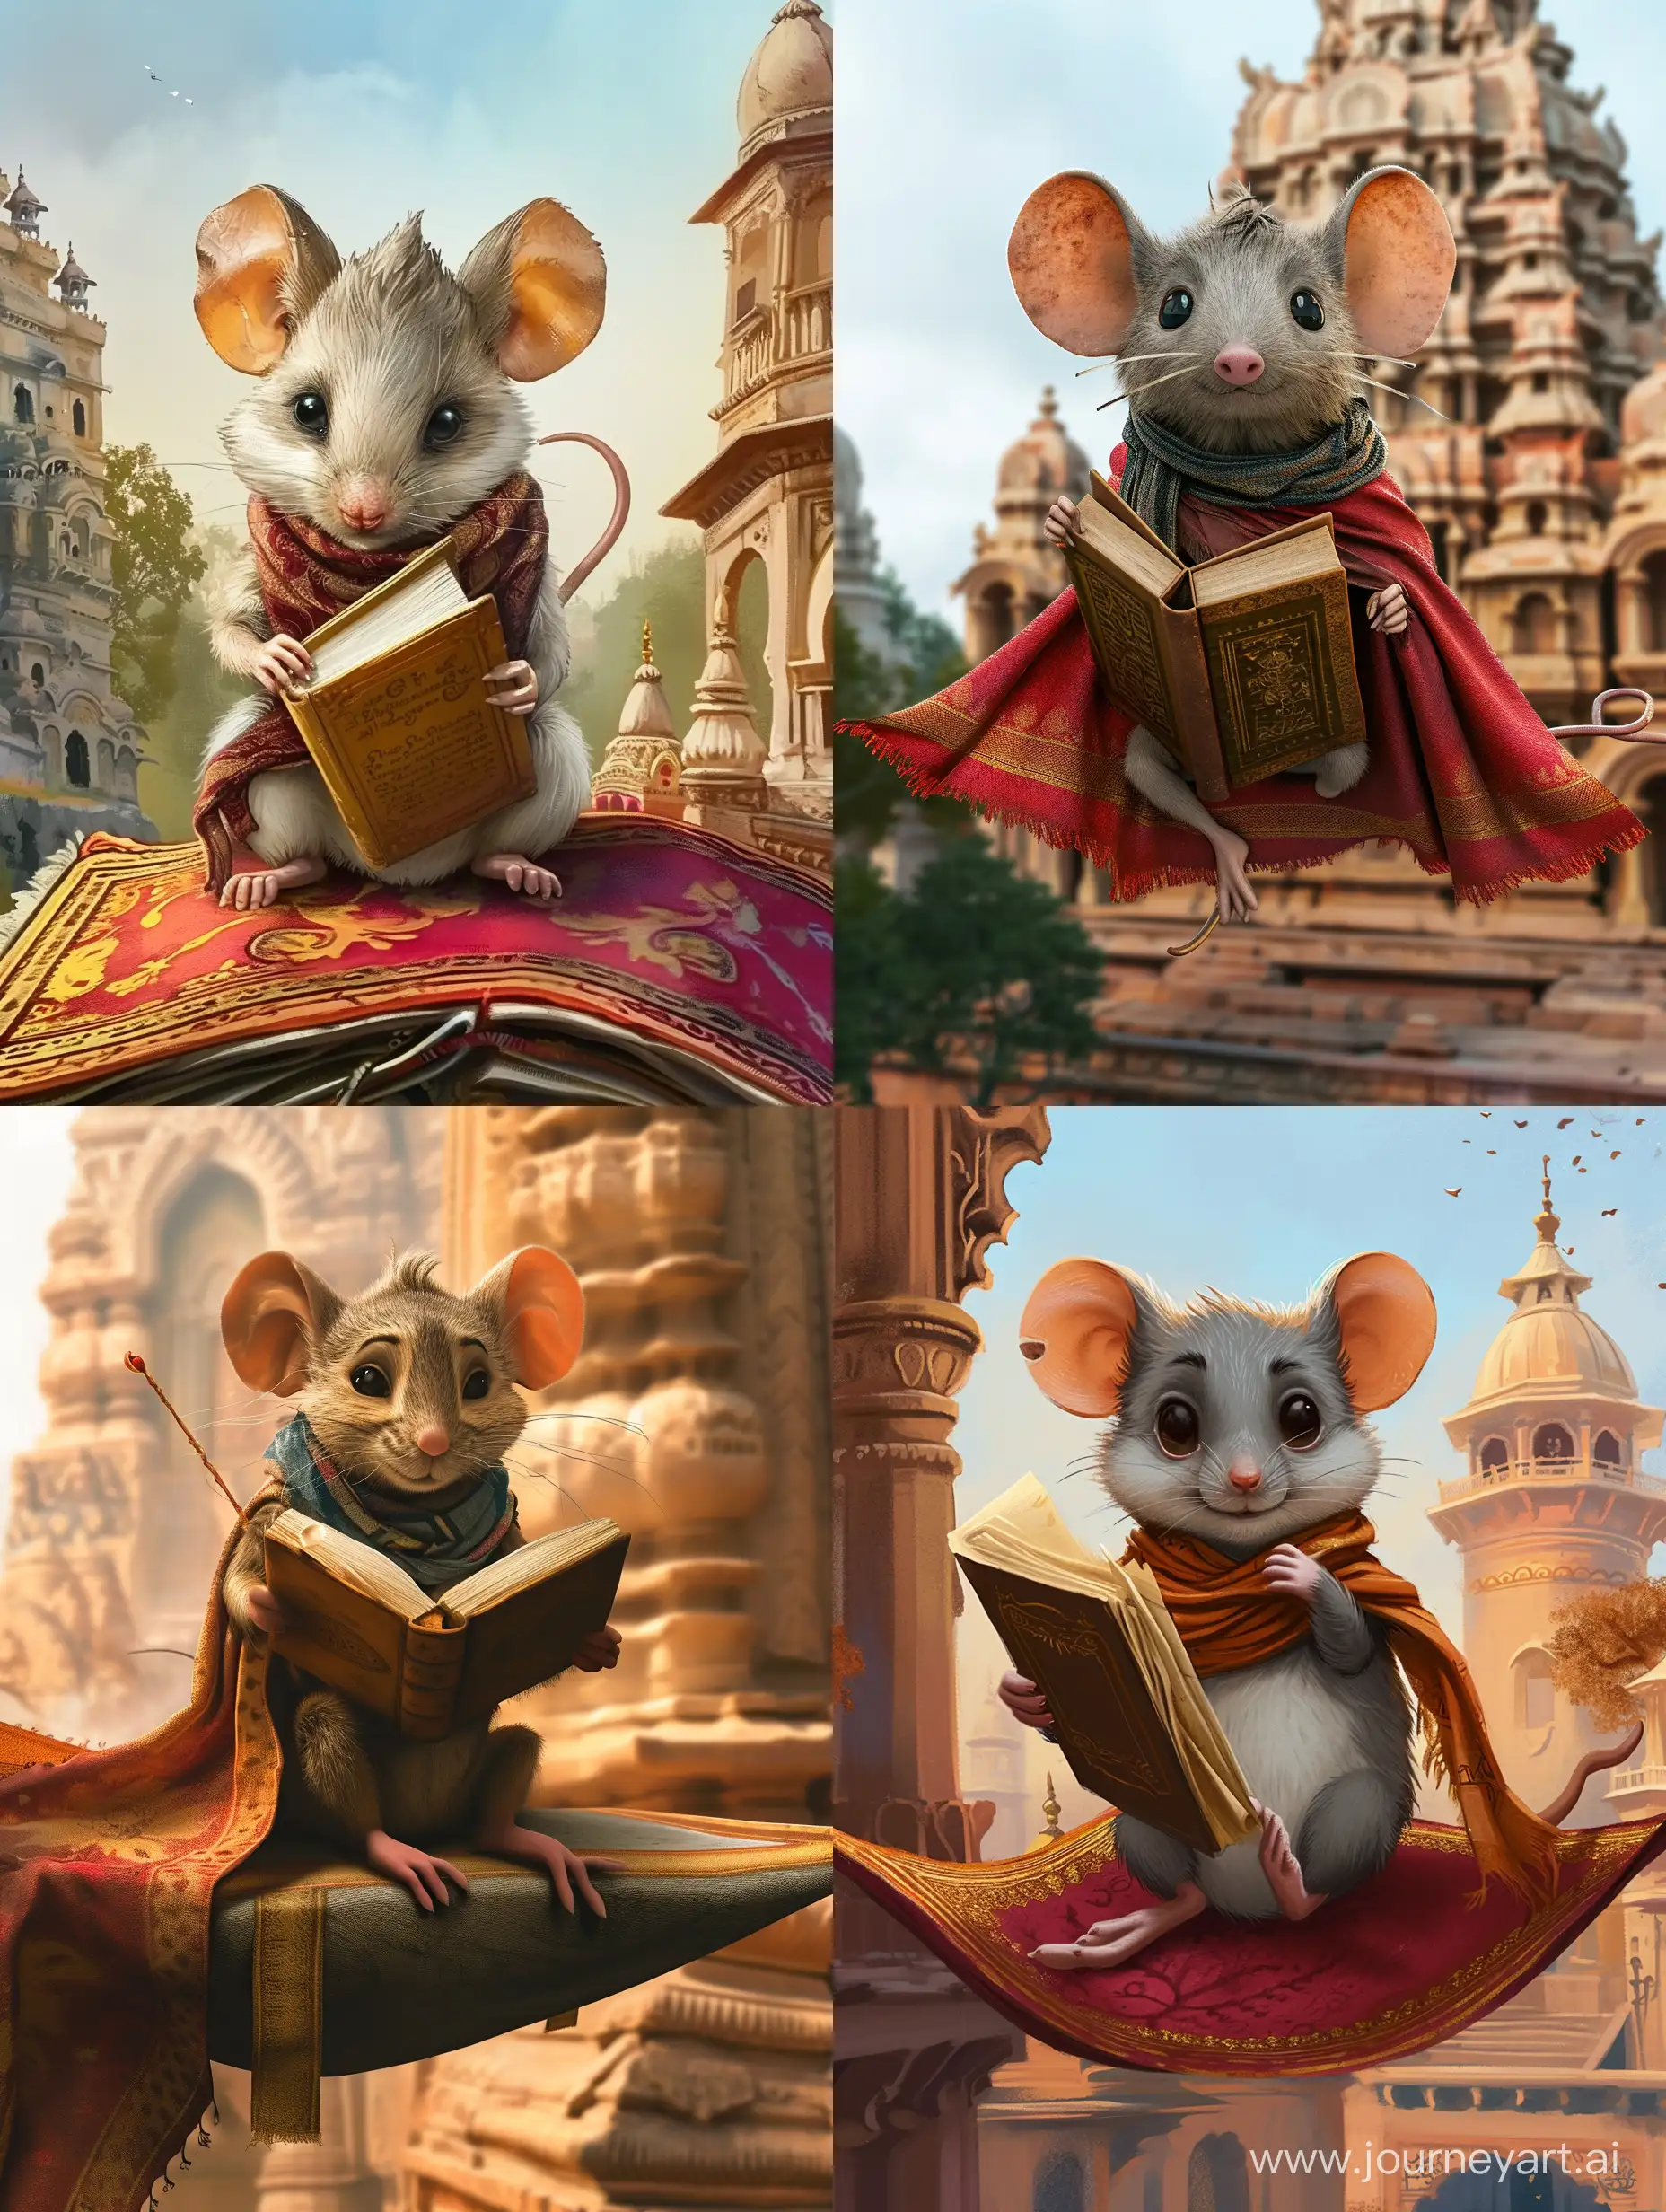 Mouse-Detective-Flying-on-Carpet-with-Book-and-Scarf-at-Indian-Temple